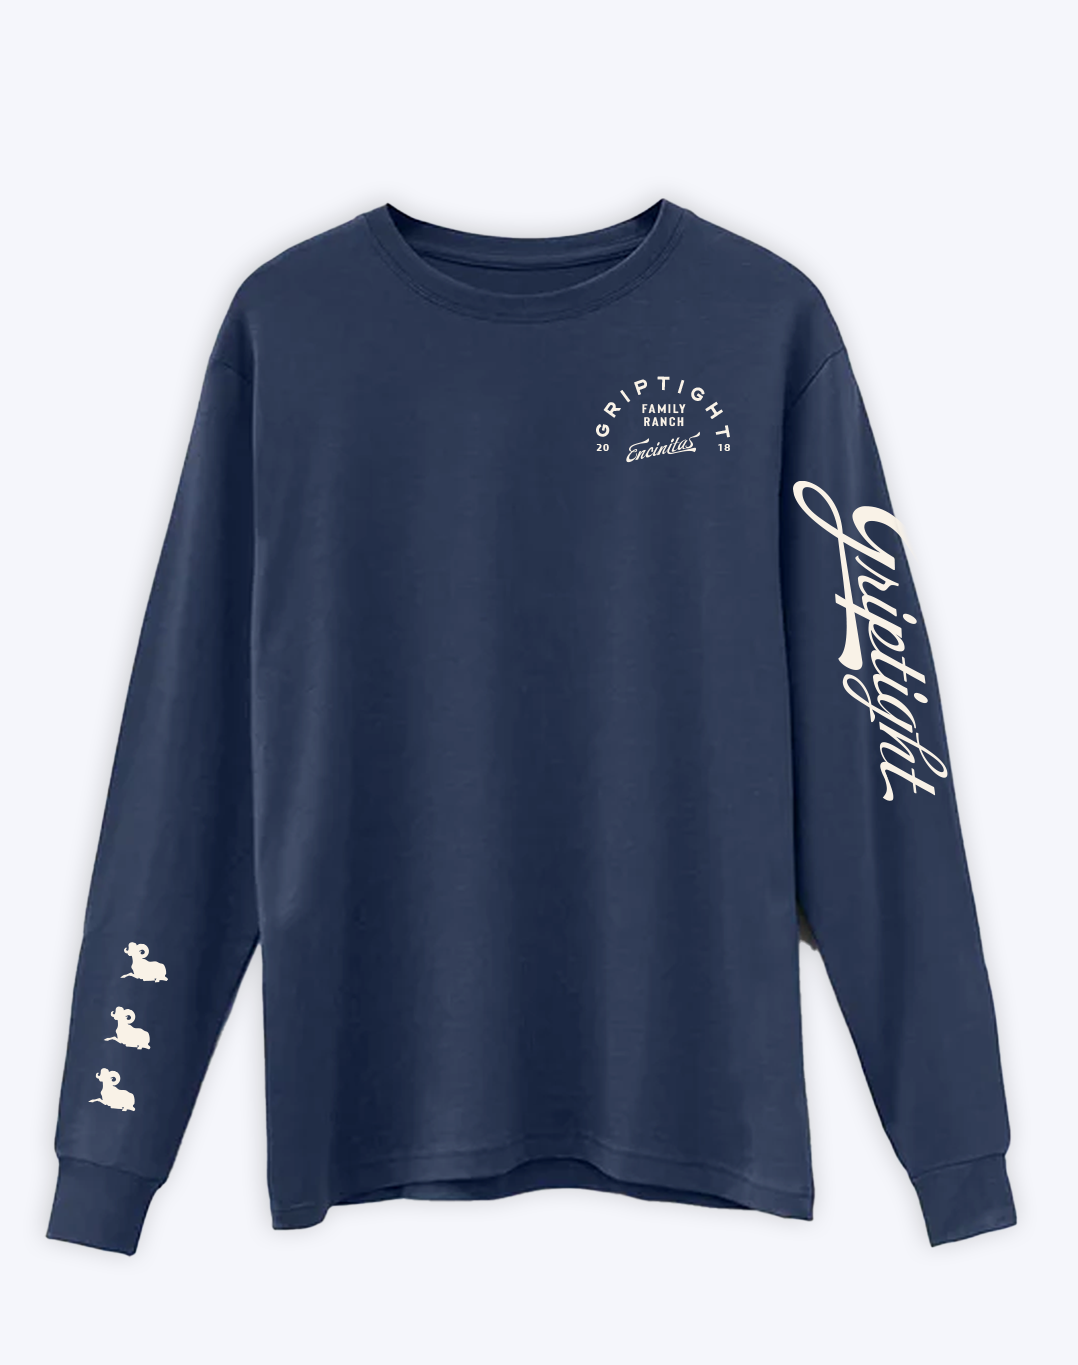 GT Durable Long Sleeve (Navy/White)